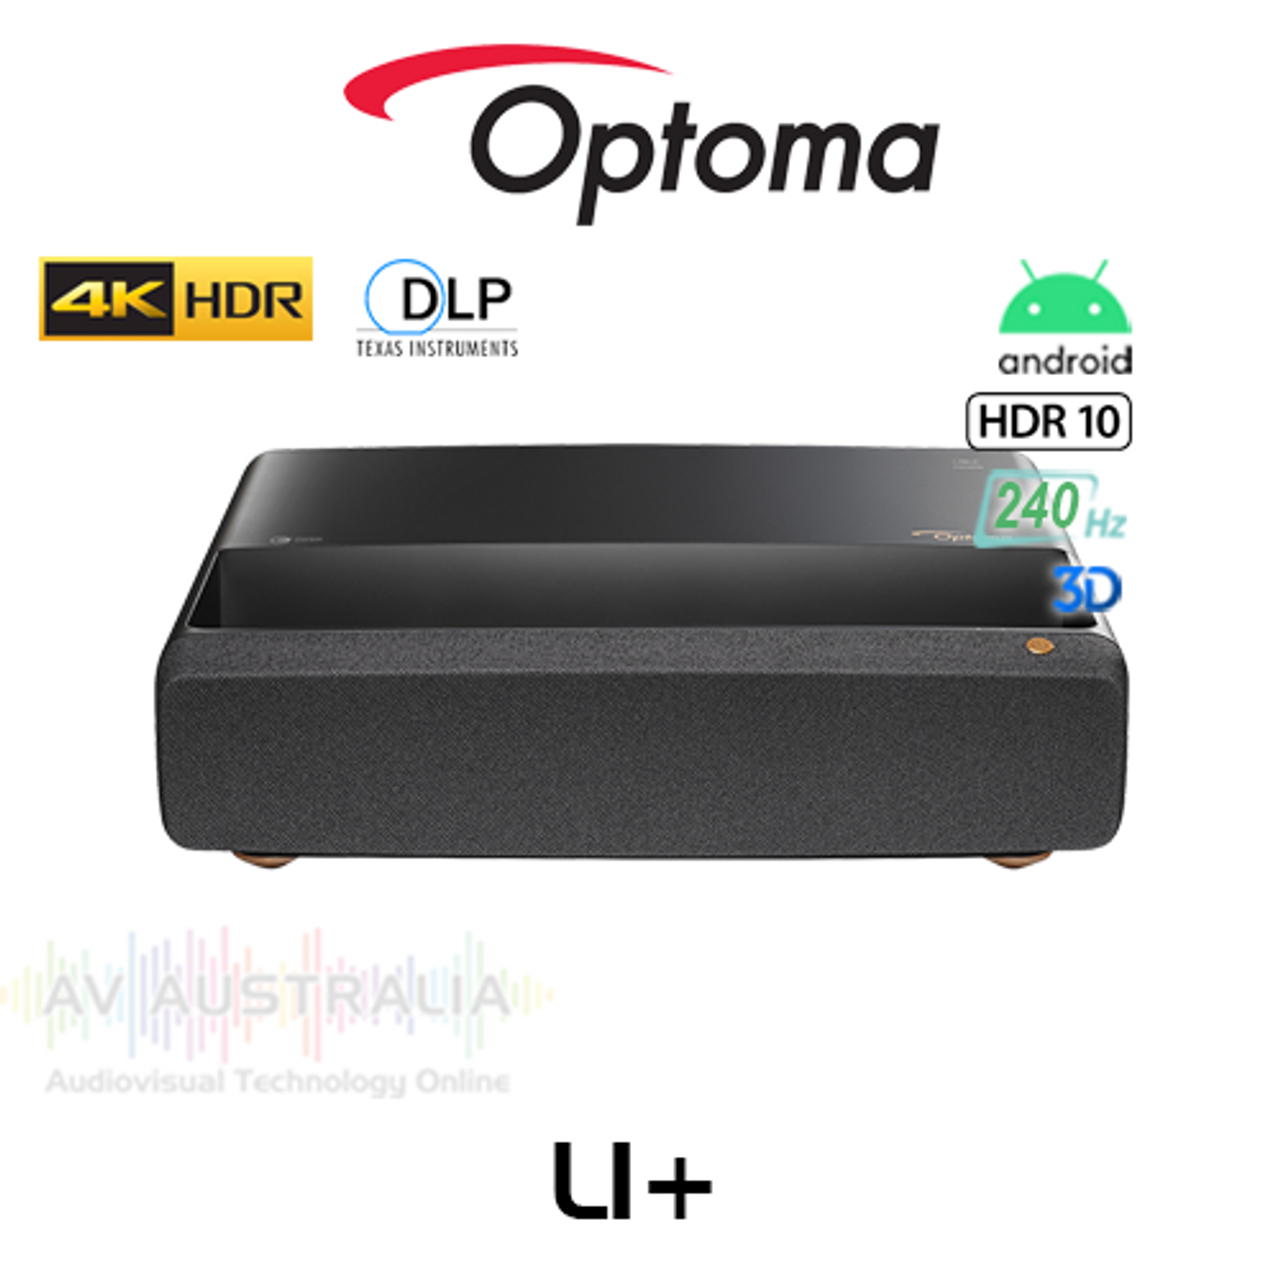 Optoma L1+ 4K HDR10 2500 Lumens 240Hz Ultra Short Throw LED Projector